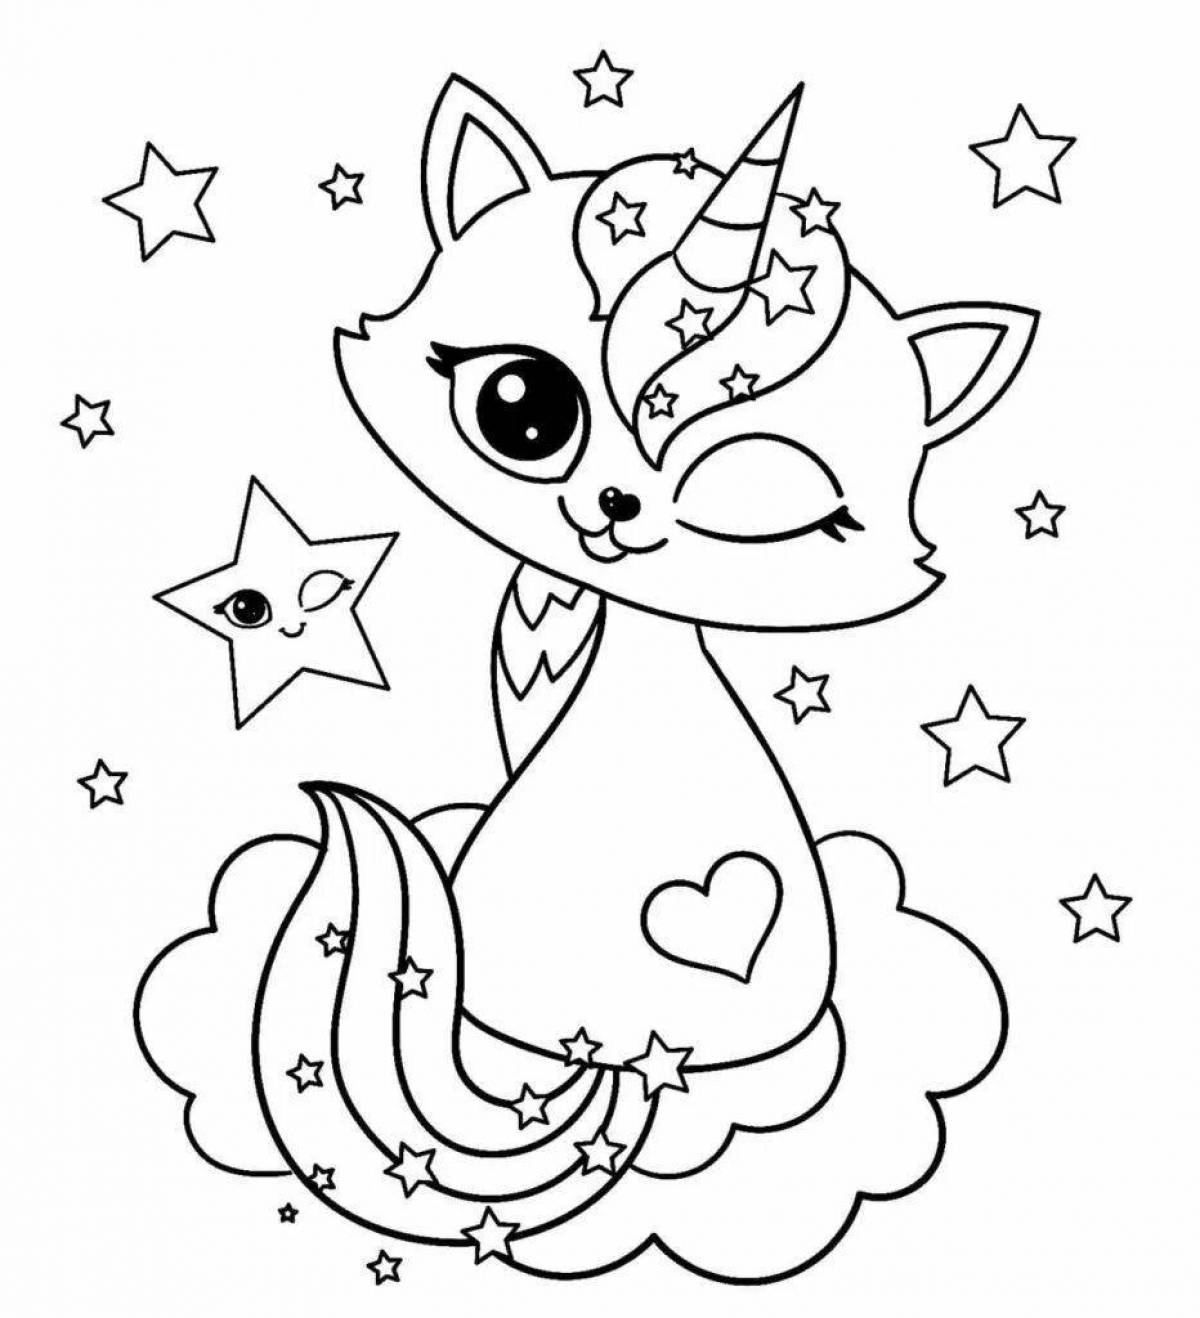 Fascinating unicorn cat coloring book for girls